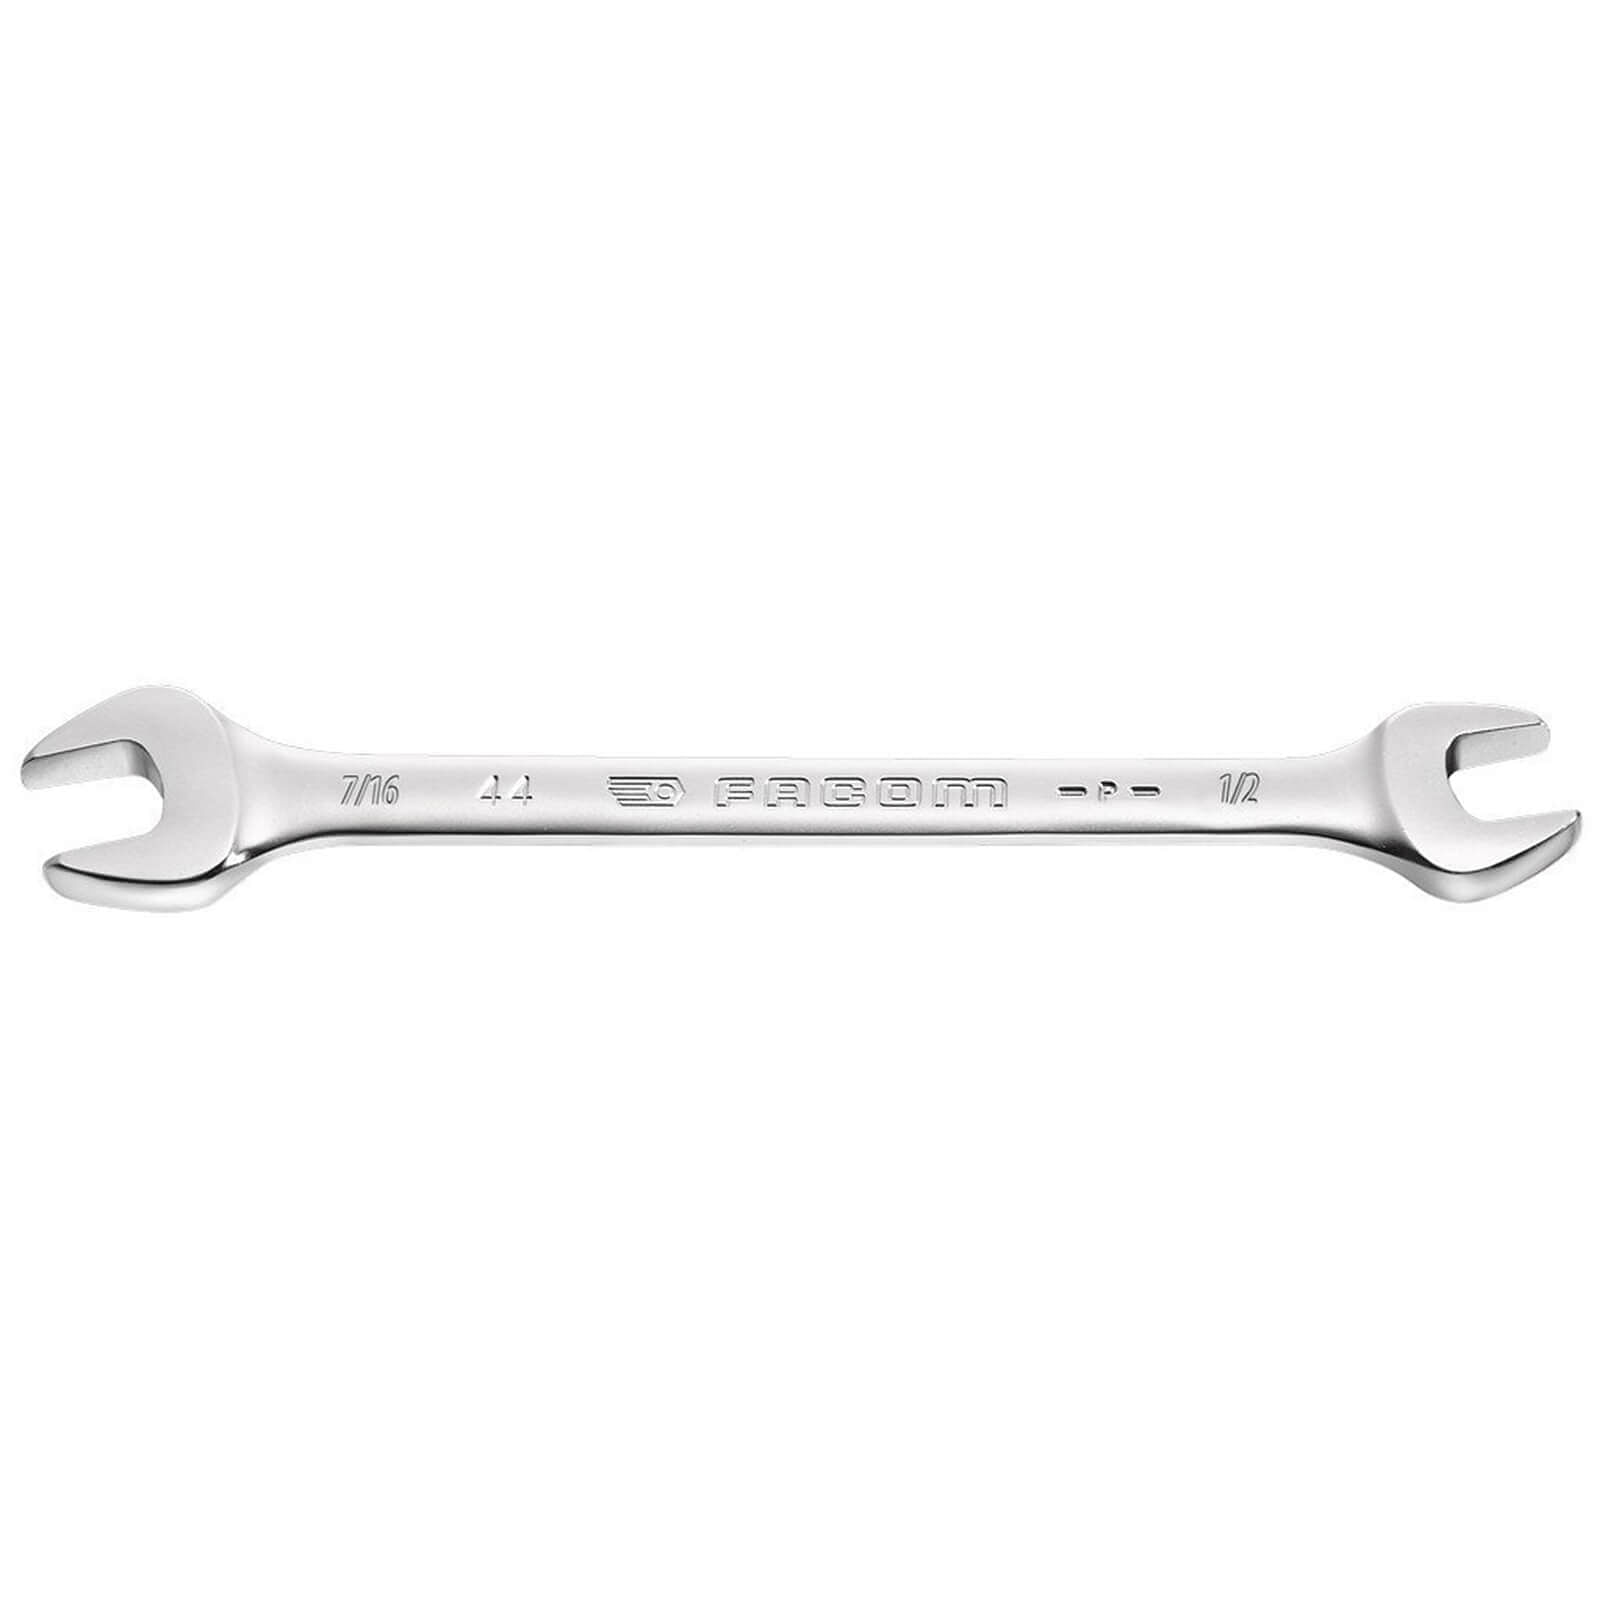 CKS 58 A Facom Combination Spanners Double-Ended Ring Spanner Hook 1 